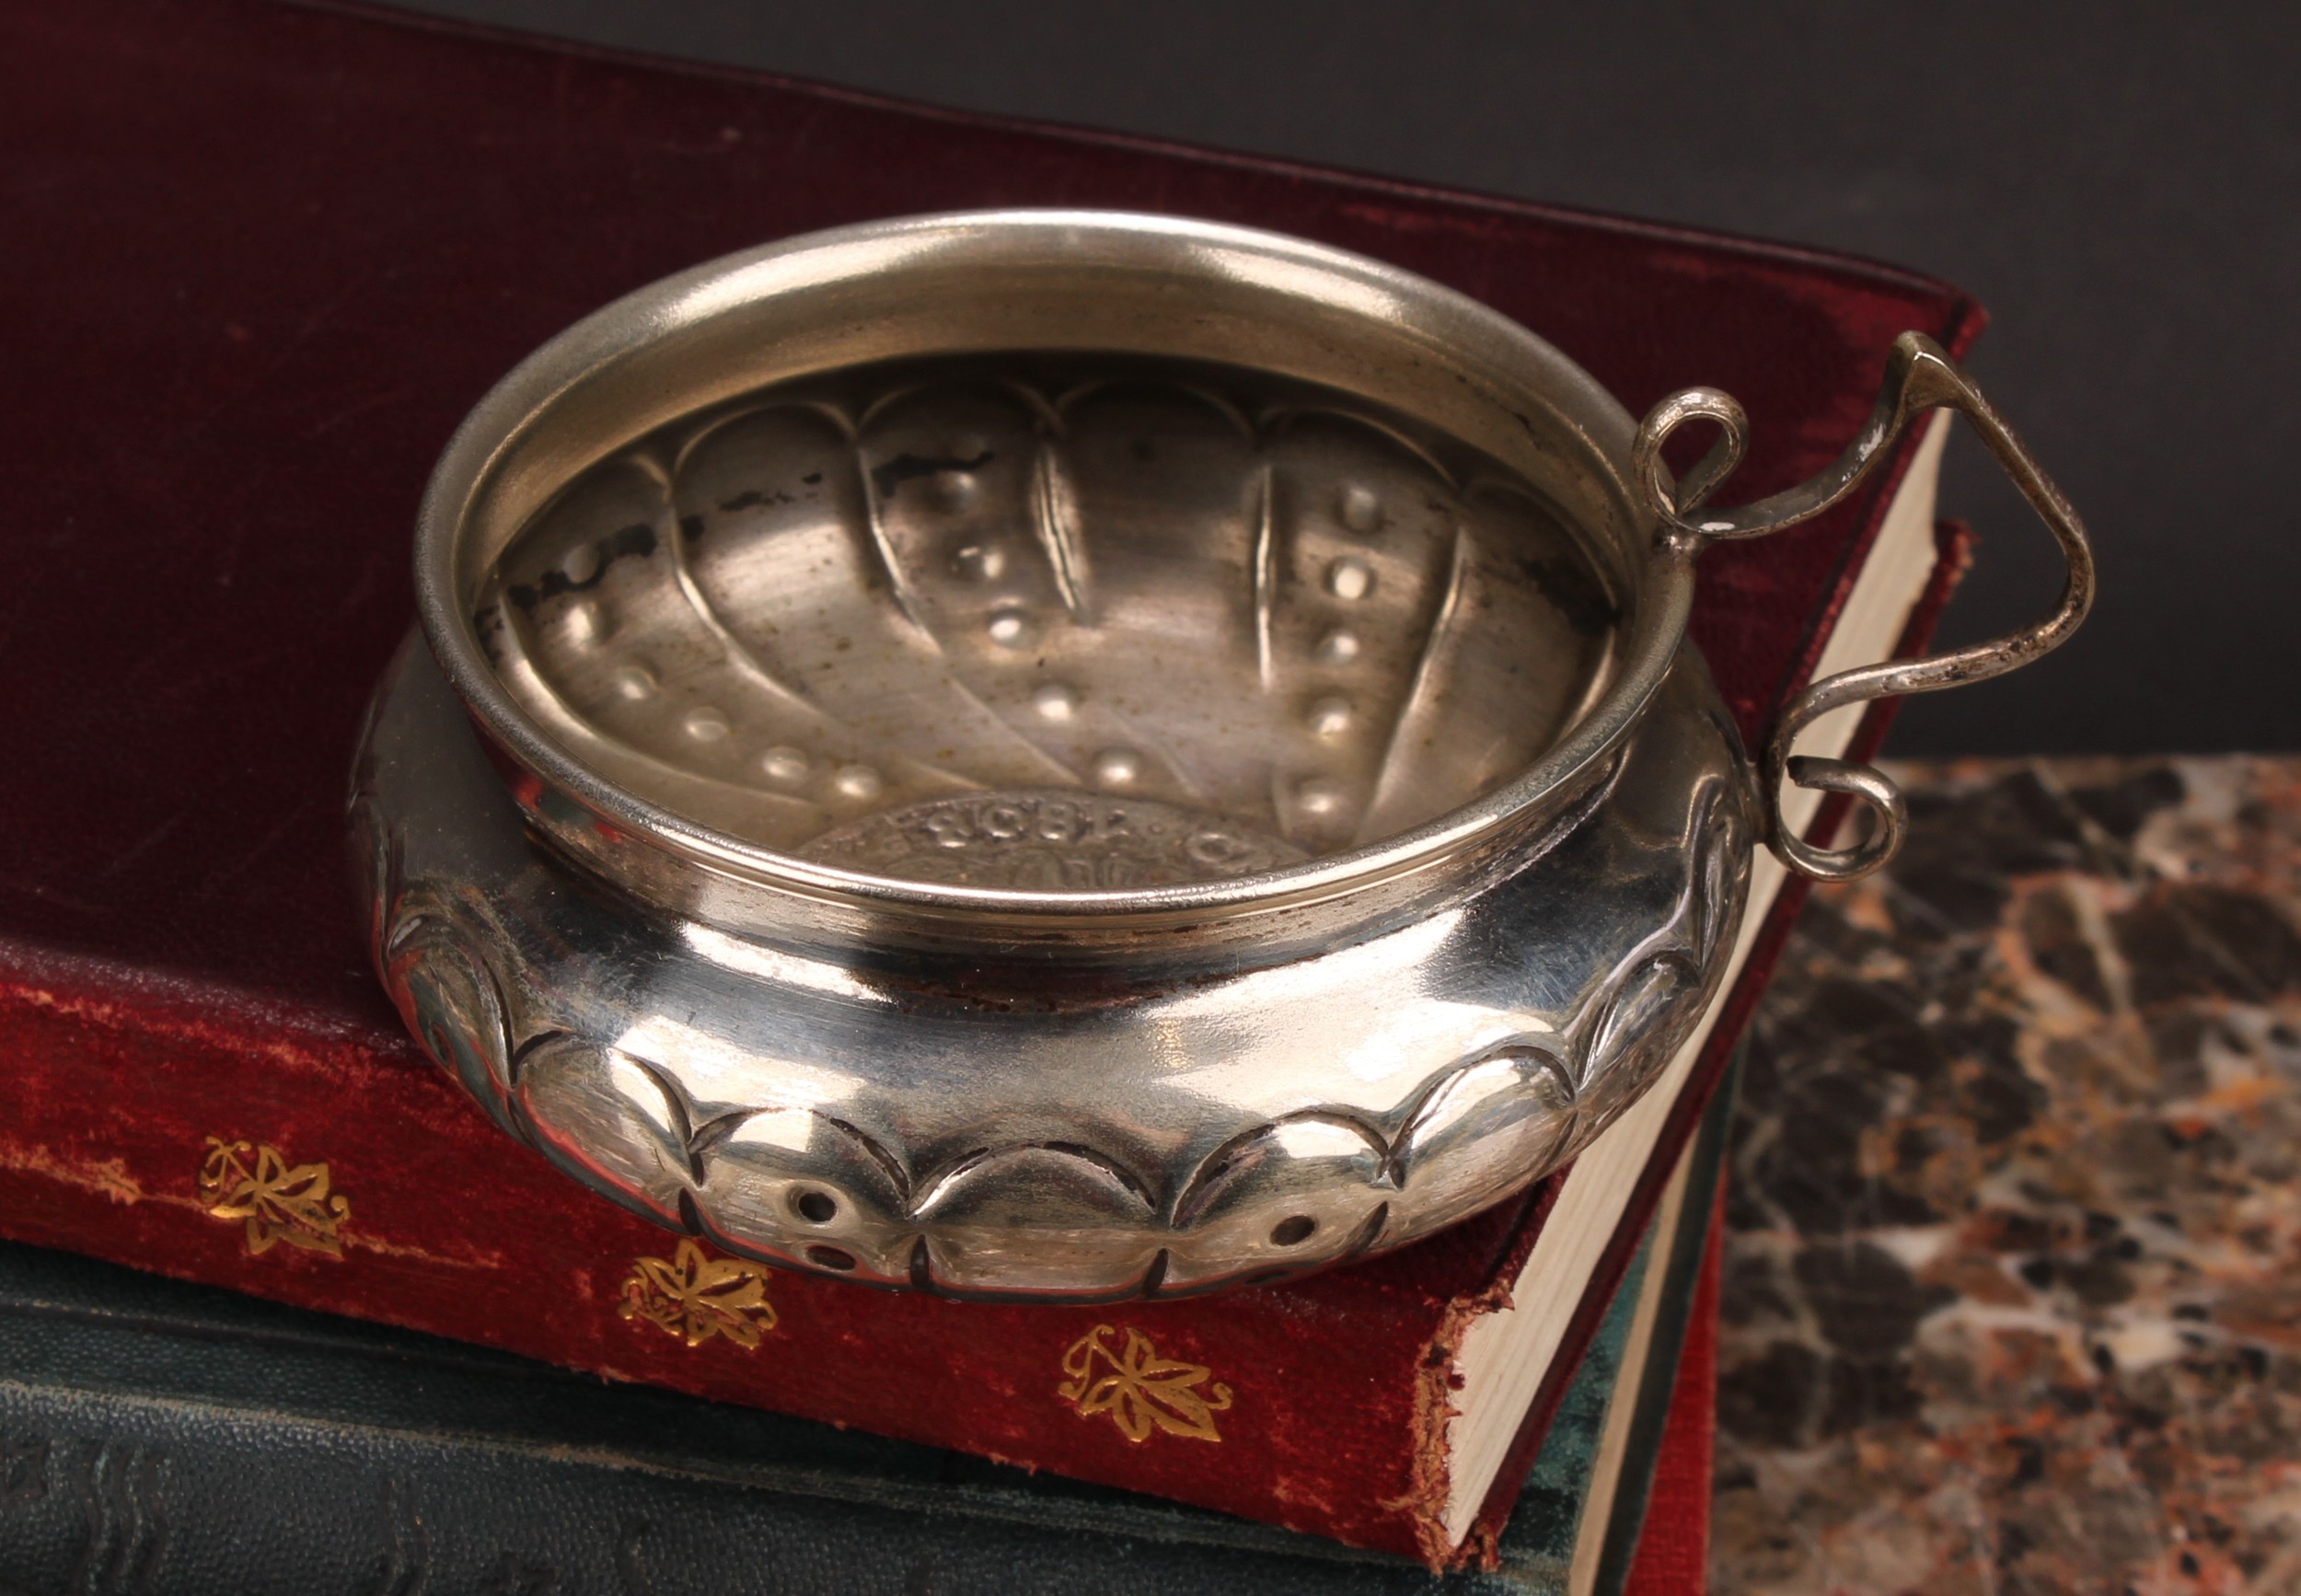 A 19th century Spanish silver wine taster, set with a Charles IV coin, 7cm diam, 54g